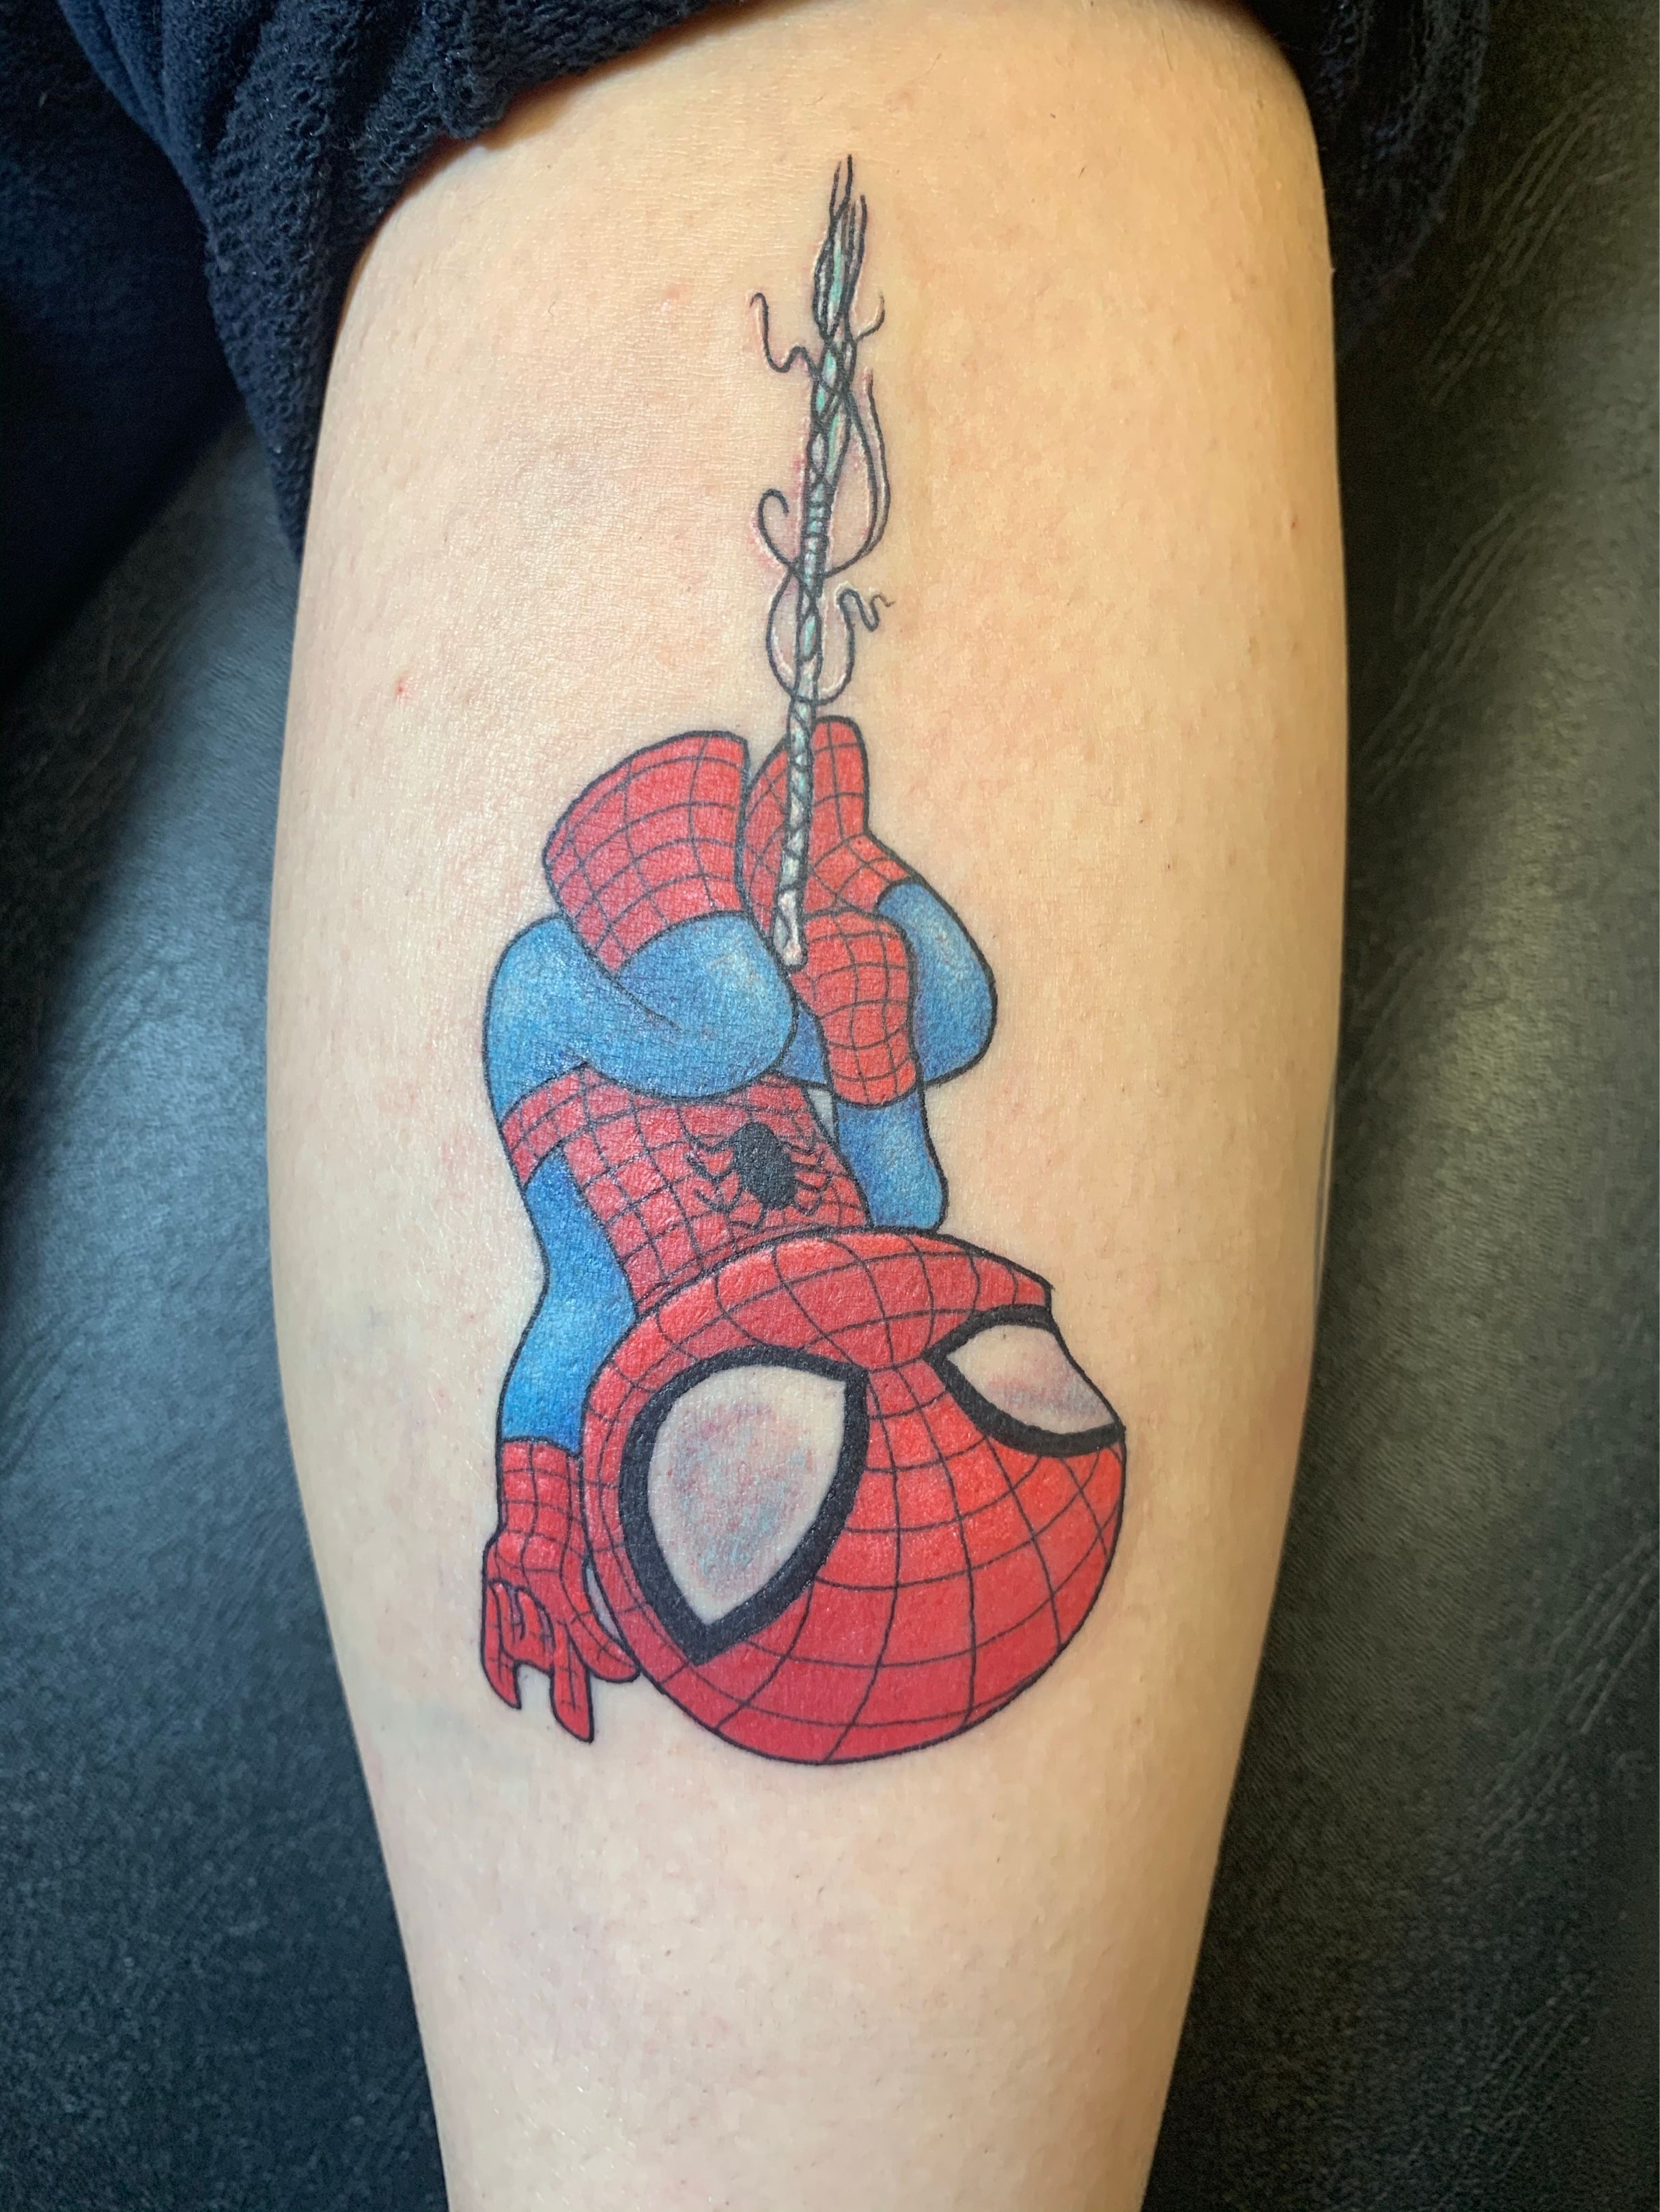 My The Amazing SpiderMan Tattoo done by Tinas ink in Santa Fe NM  r Spiderman